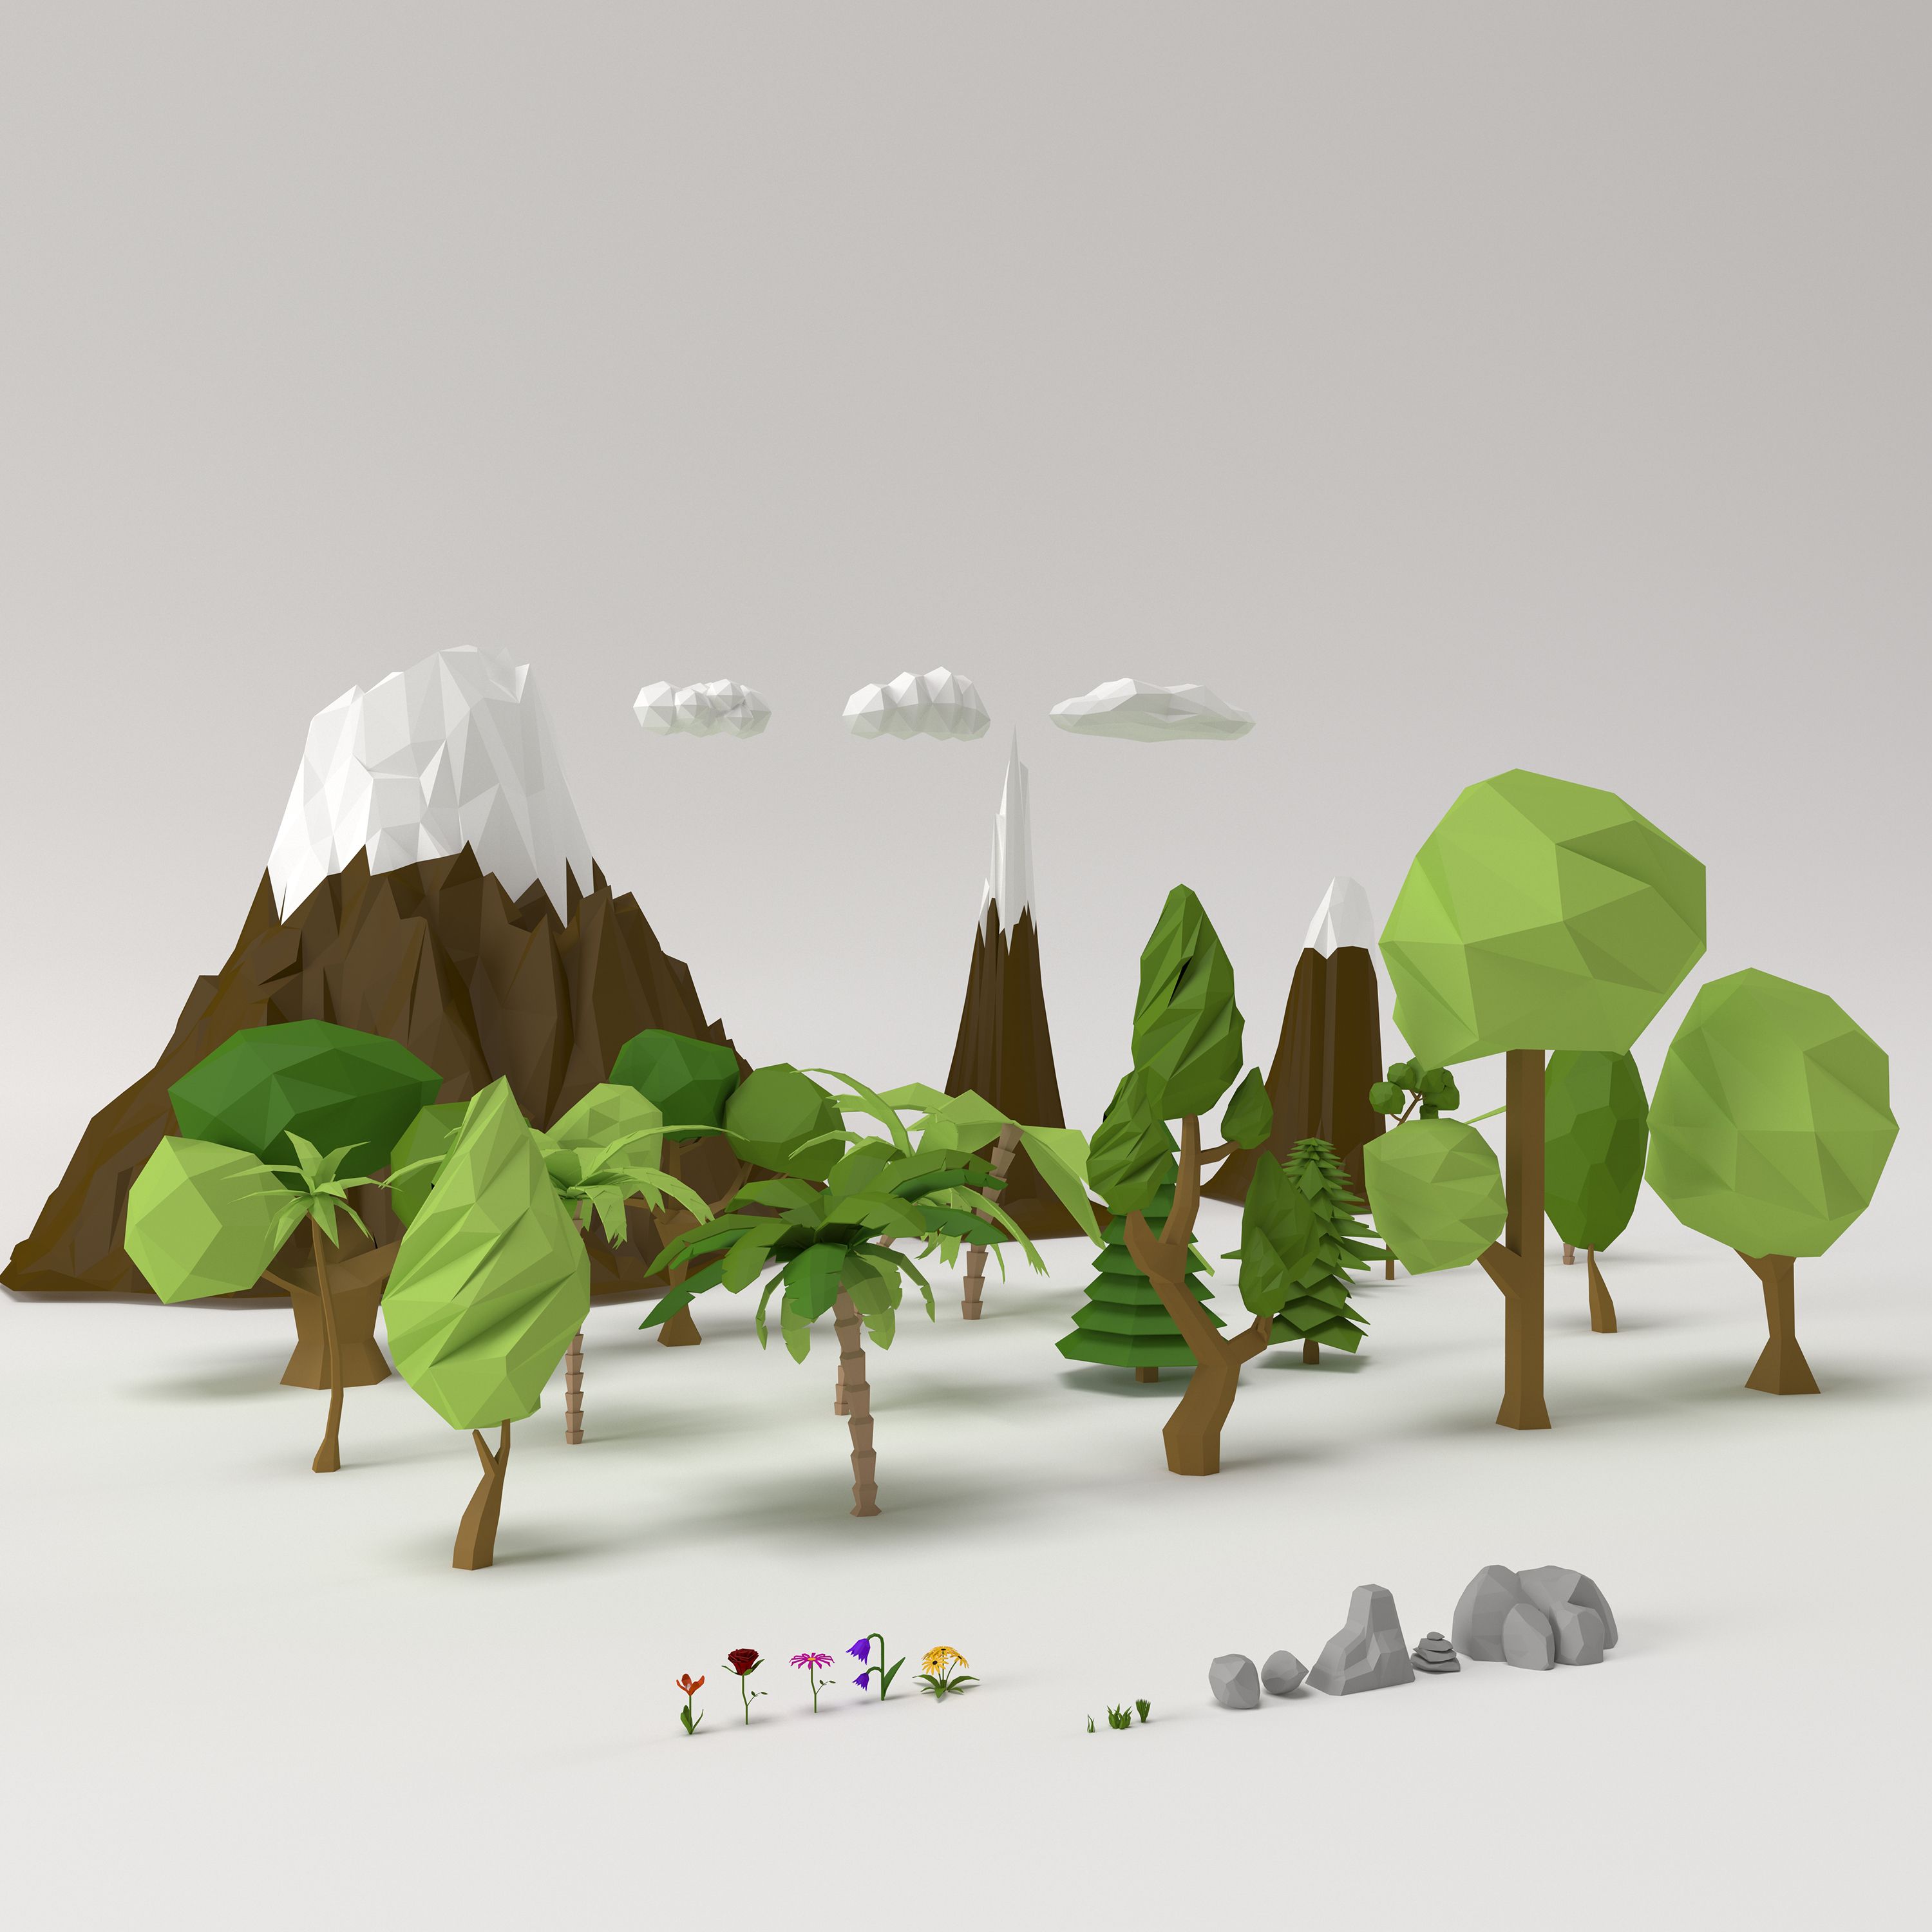 Low poly Trees Flowers Grass Rocks Clouds and MountainsD model. Low poly, Model tree, Low poly 3D models